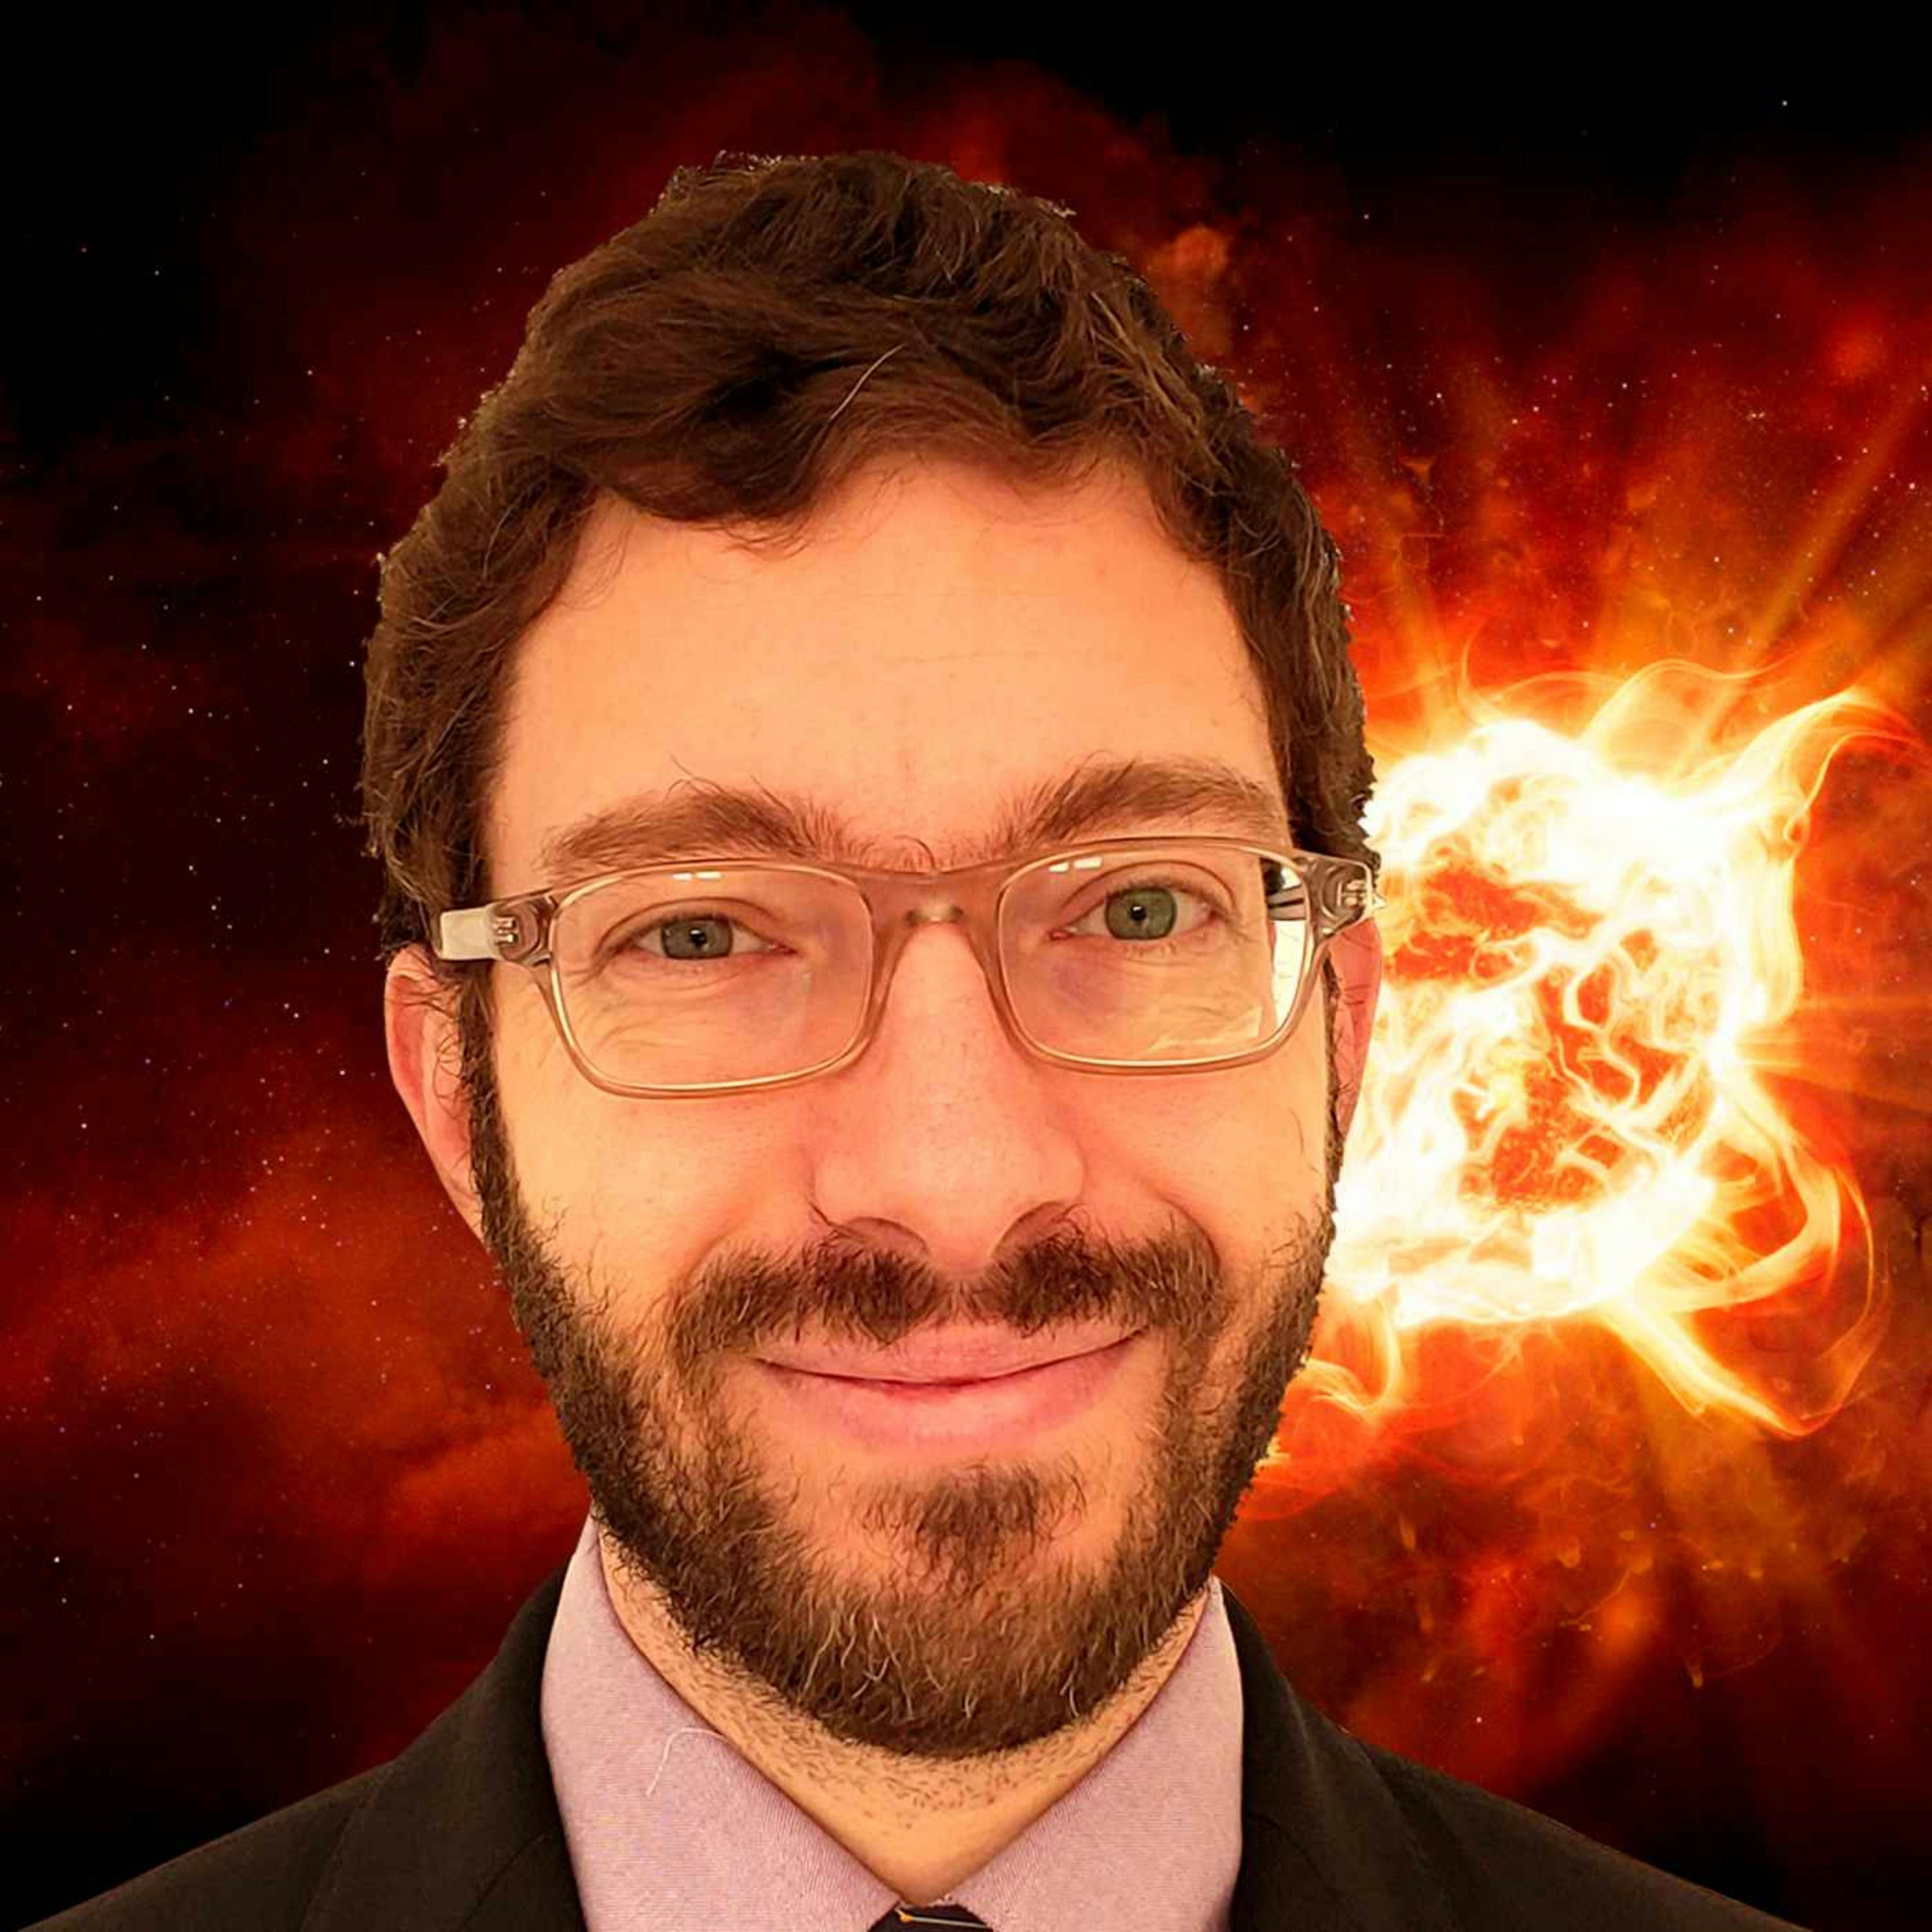 Interview: The science of exploding stars